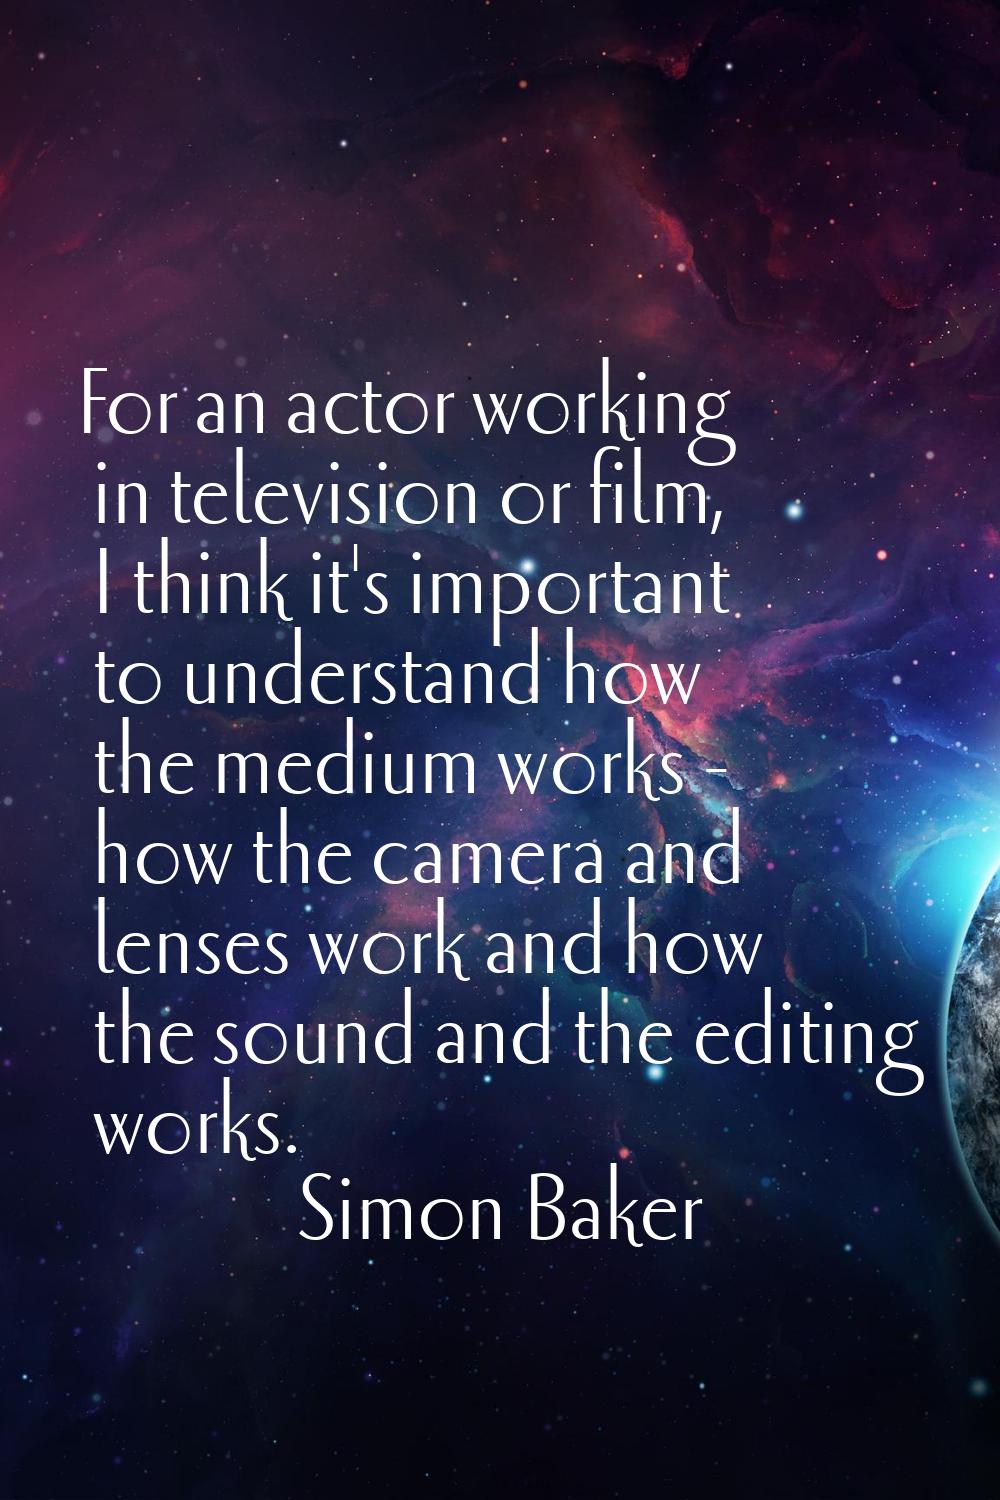 For an actor working in television or film, I think it's important to understand how the medium wor